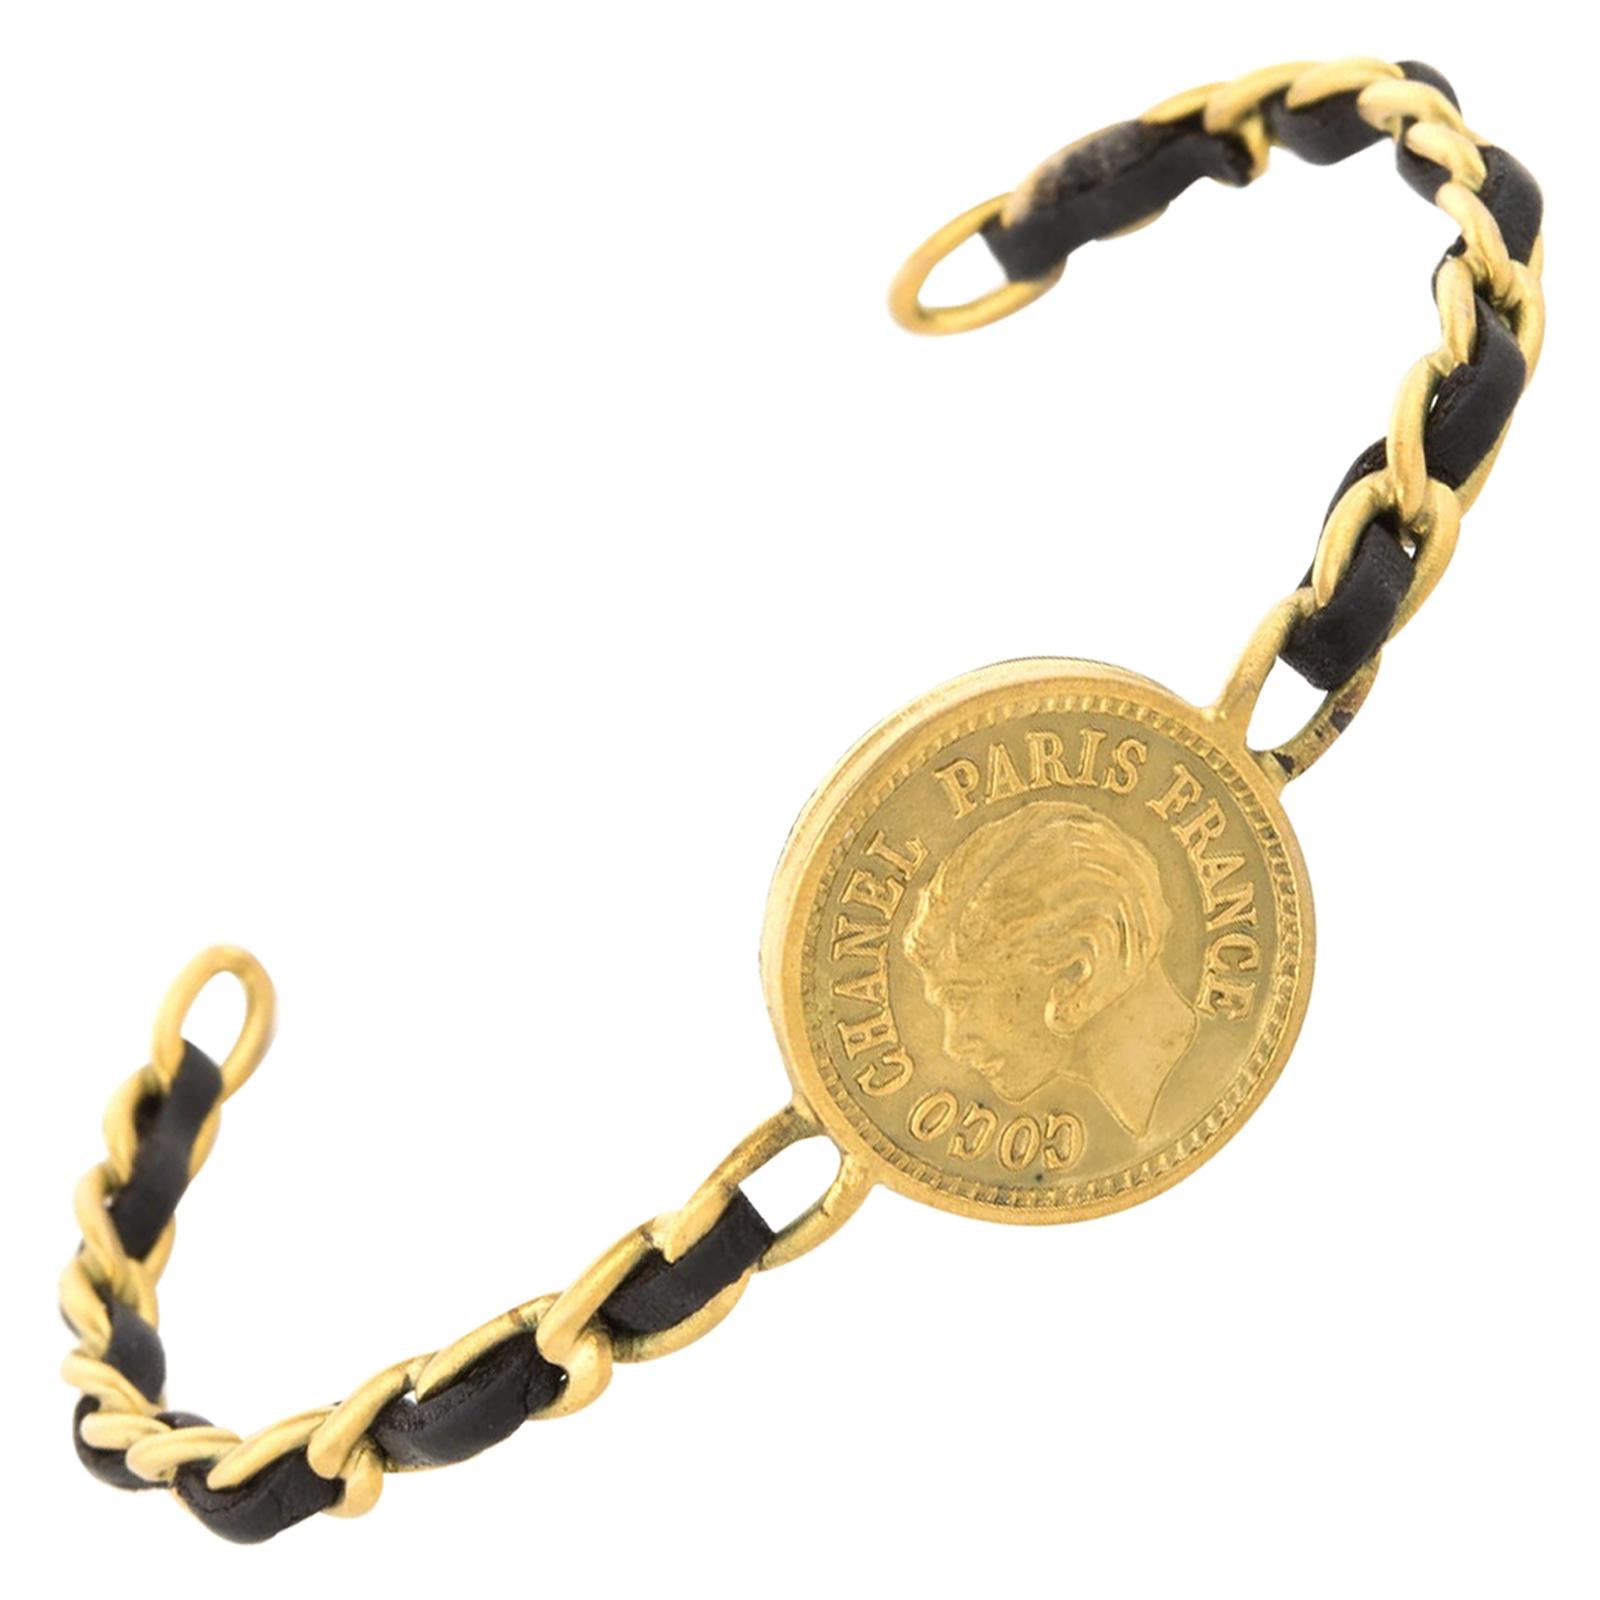 Vintage Chanel Coco Coin Cuff c1995 Chain Link Leather Bracelet Yellow Gold Tone For Sale